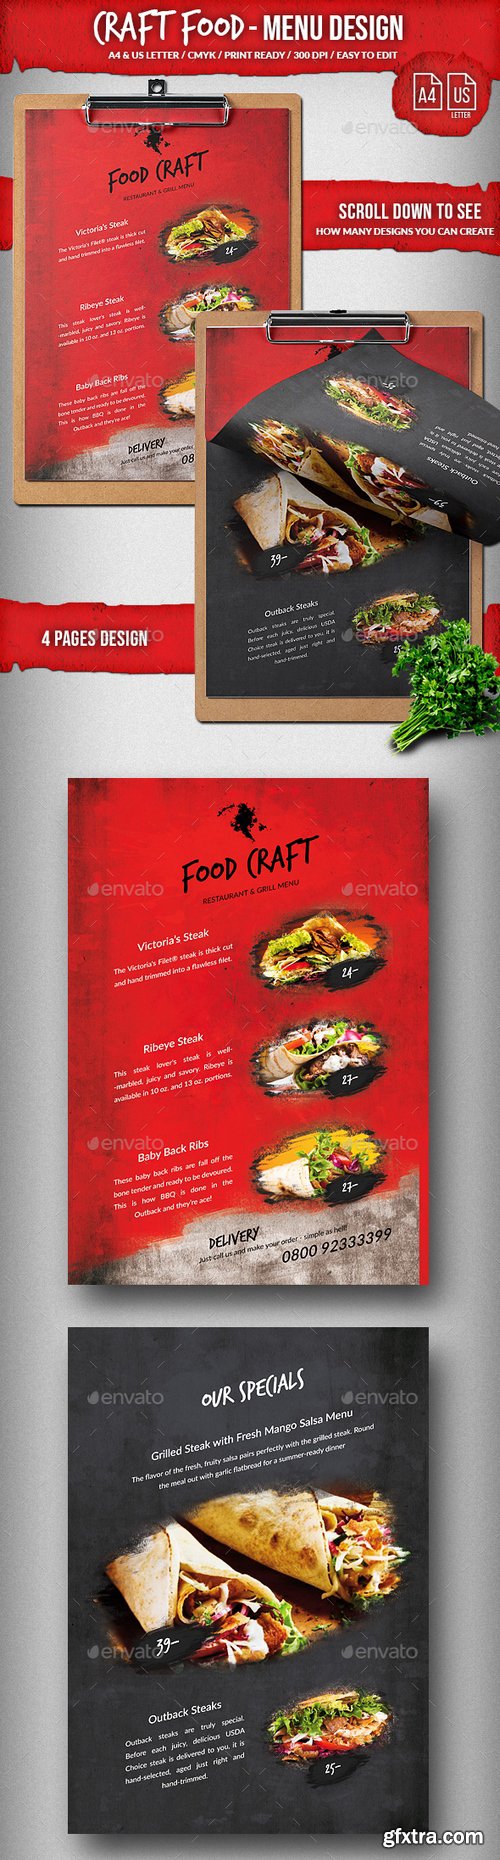 Graphicriver - Craft Food Single 4 Pages A4 & US Letter Design 21982900